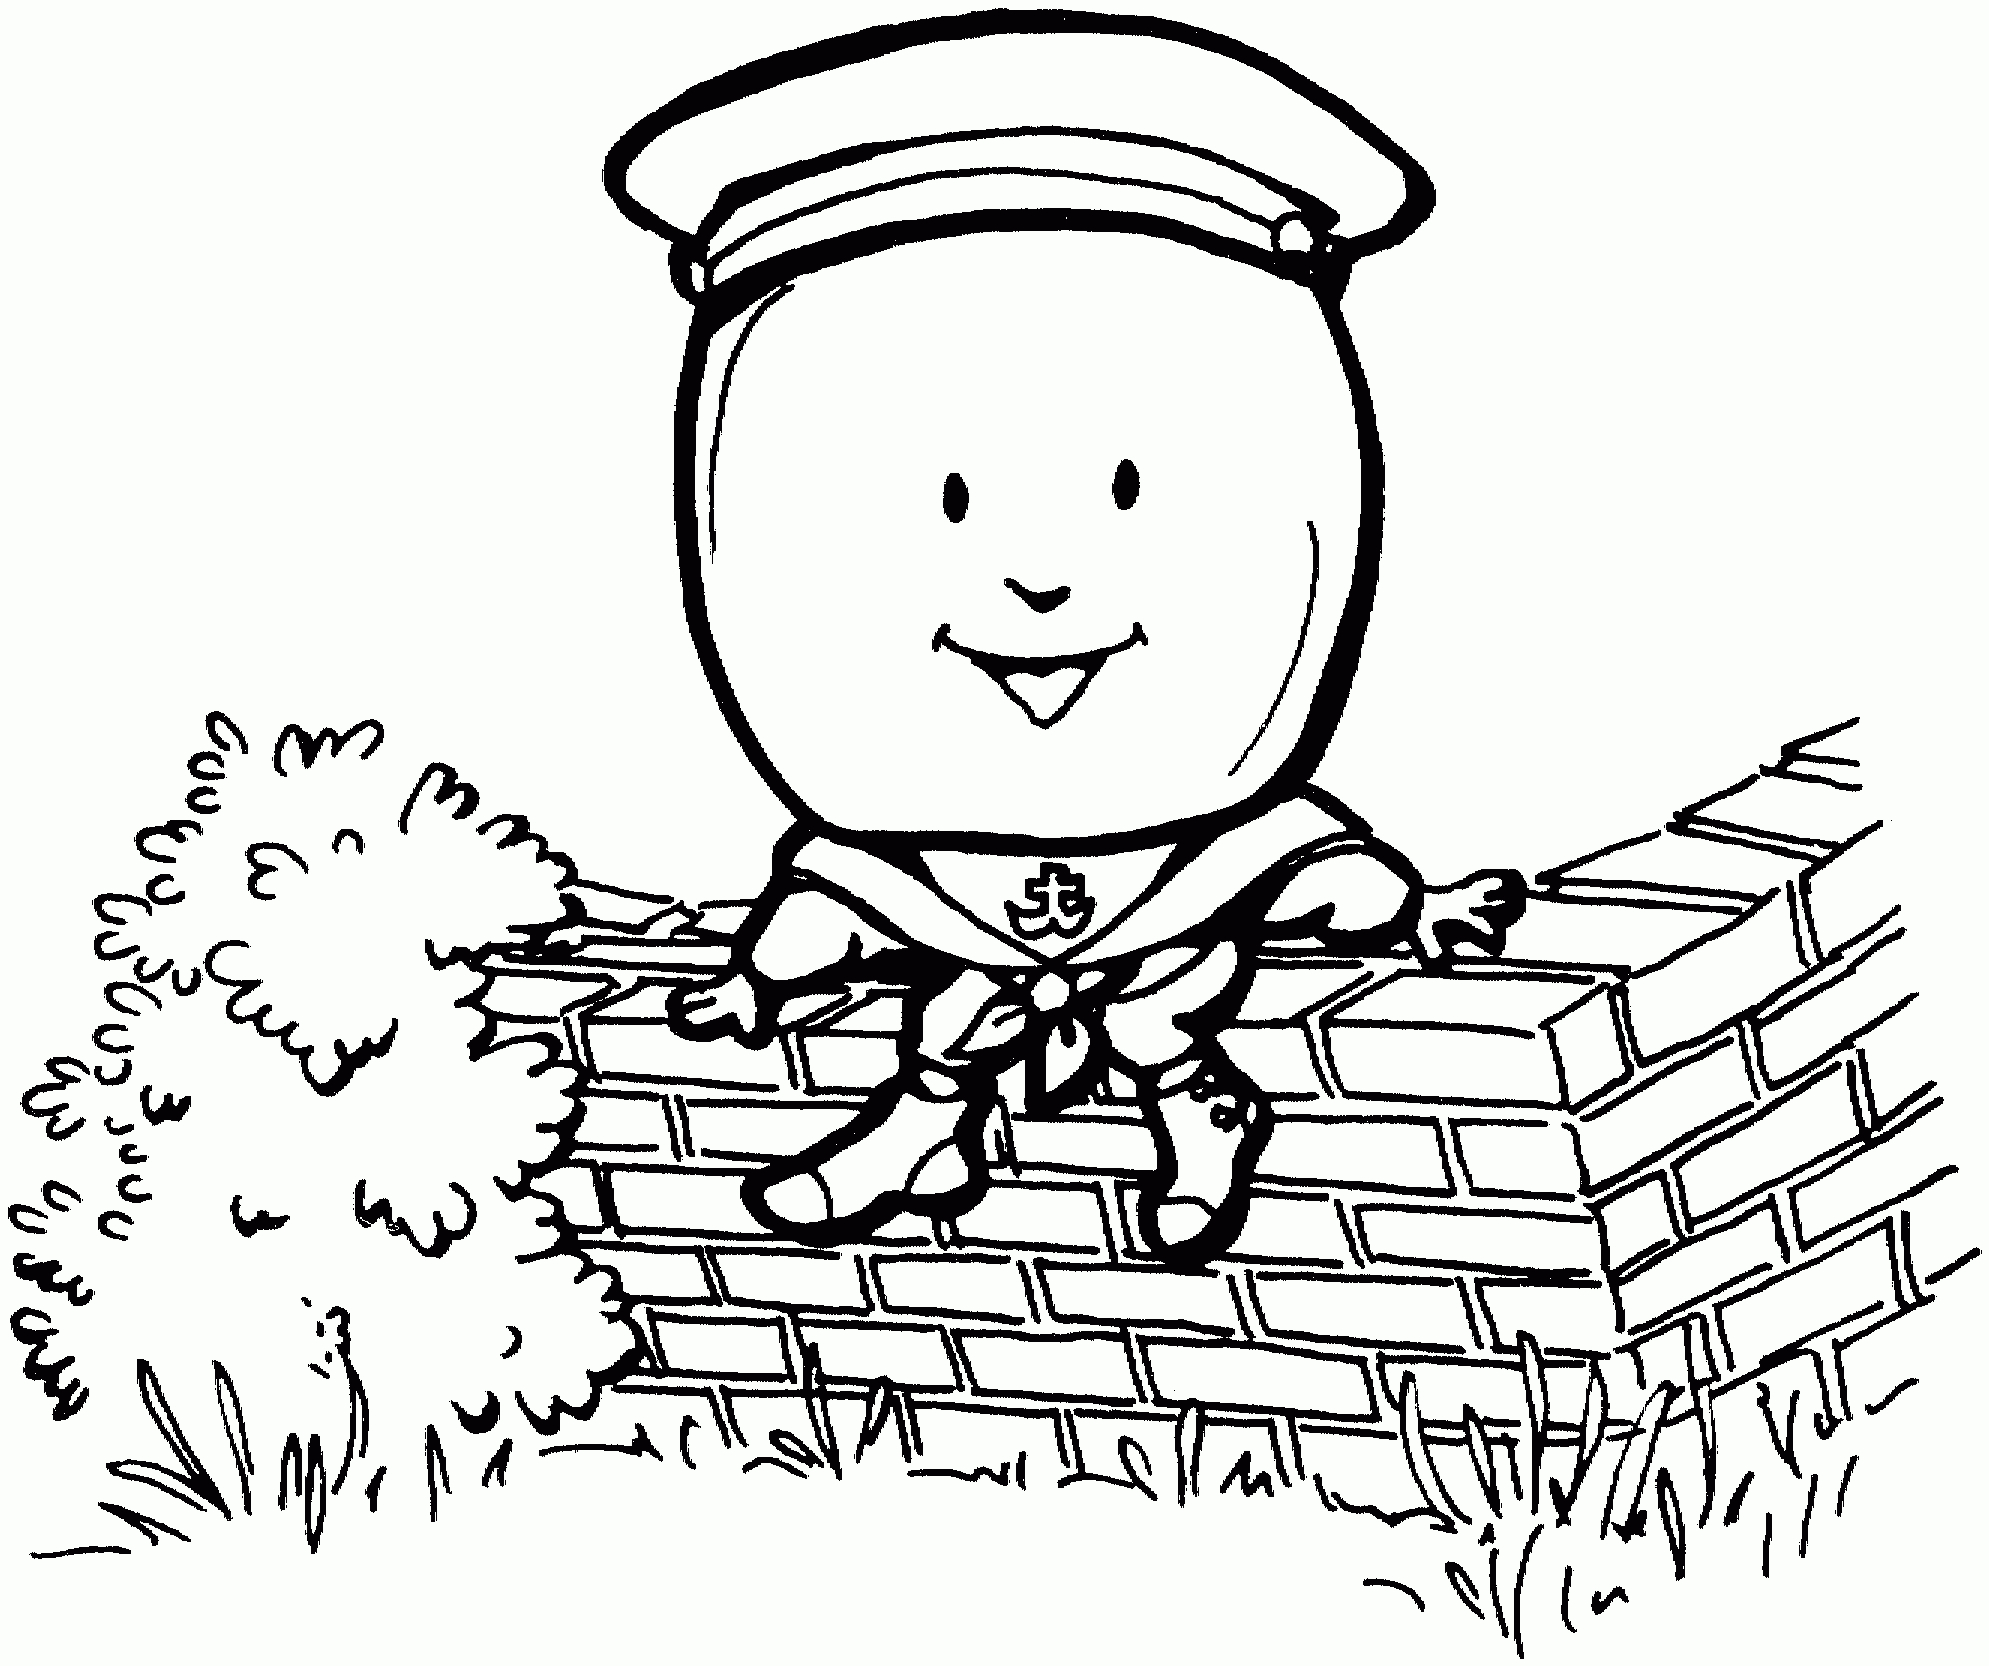 Humpty Dumpty Coloring Pages To Download And Print For Free - Mother Goose Coloring Pages Free Printable